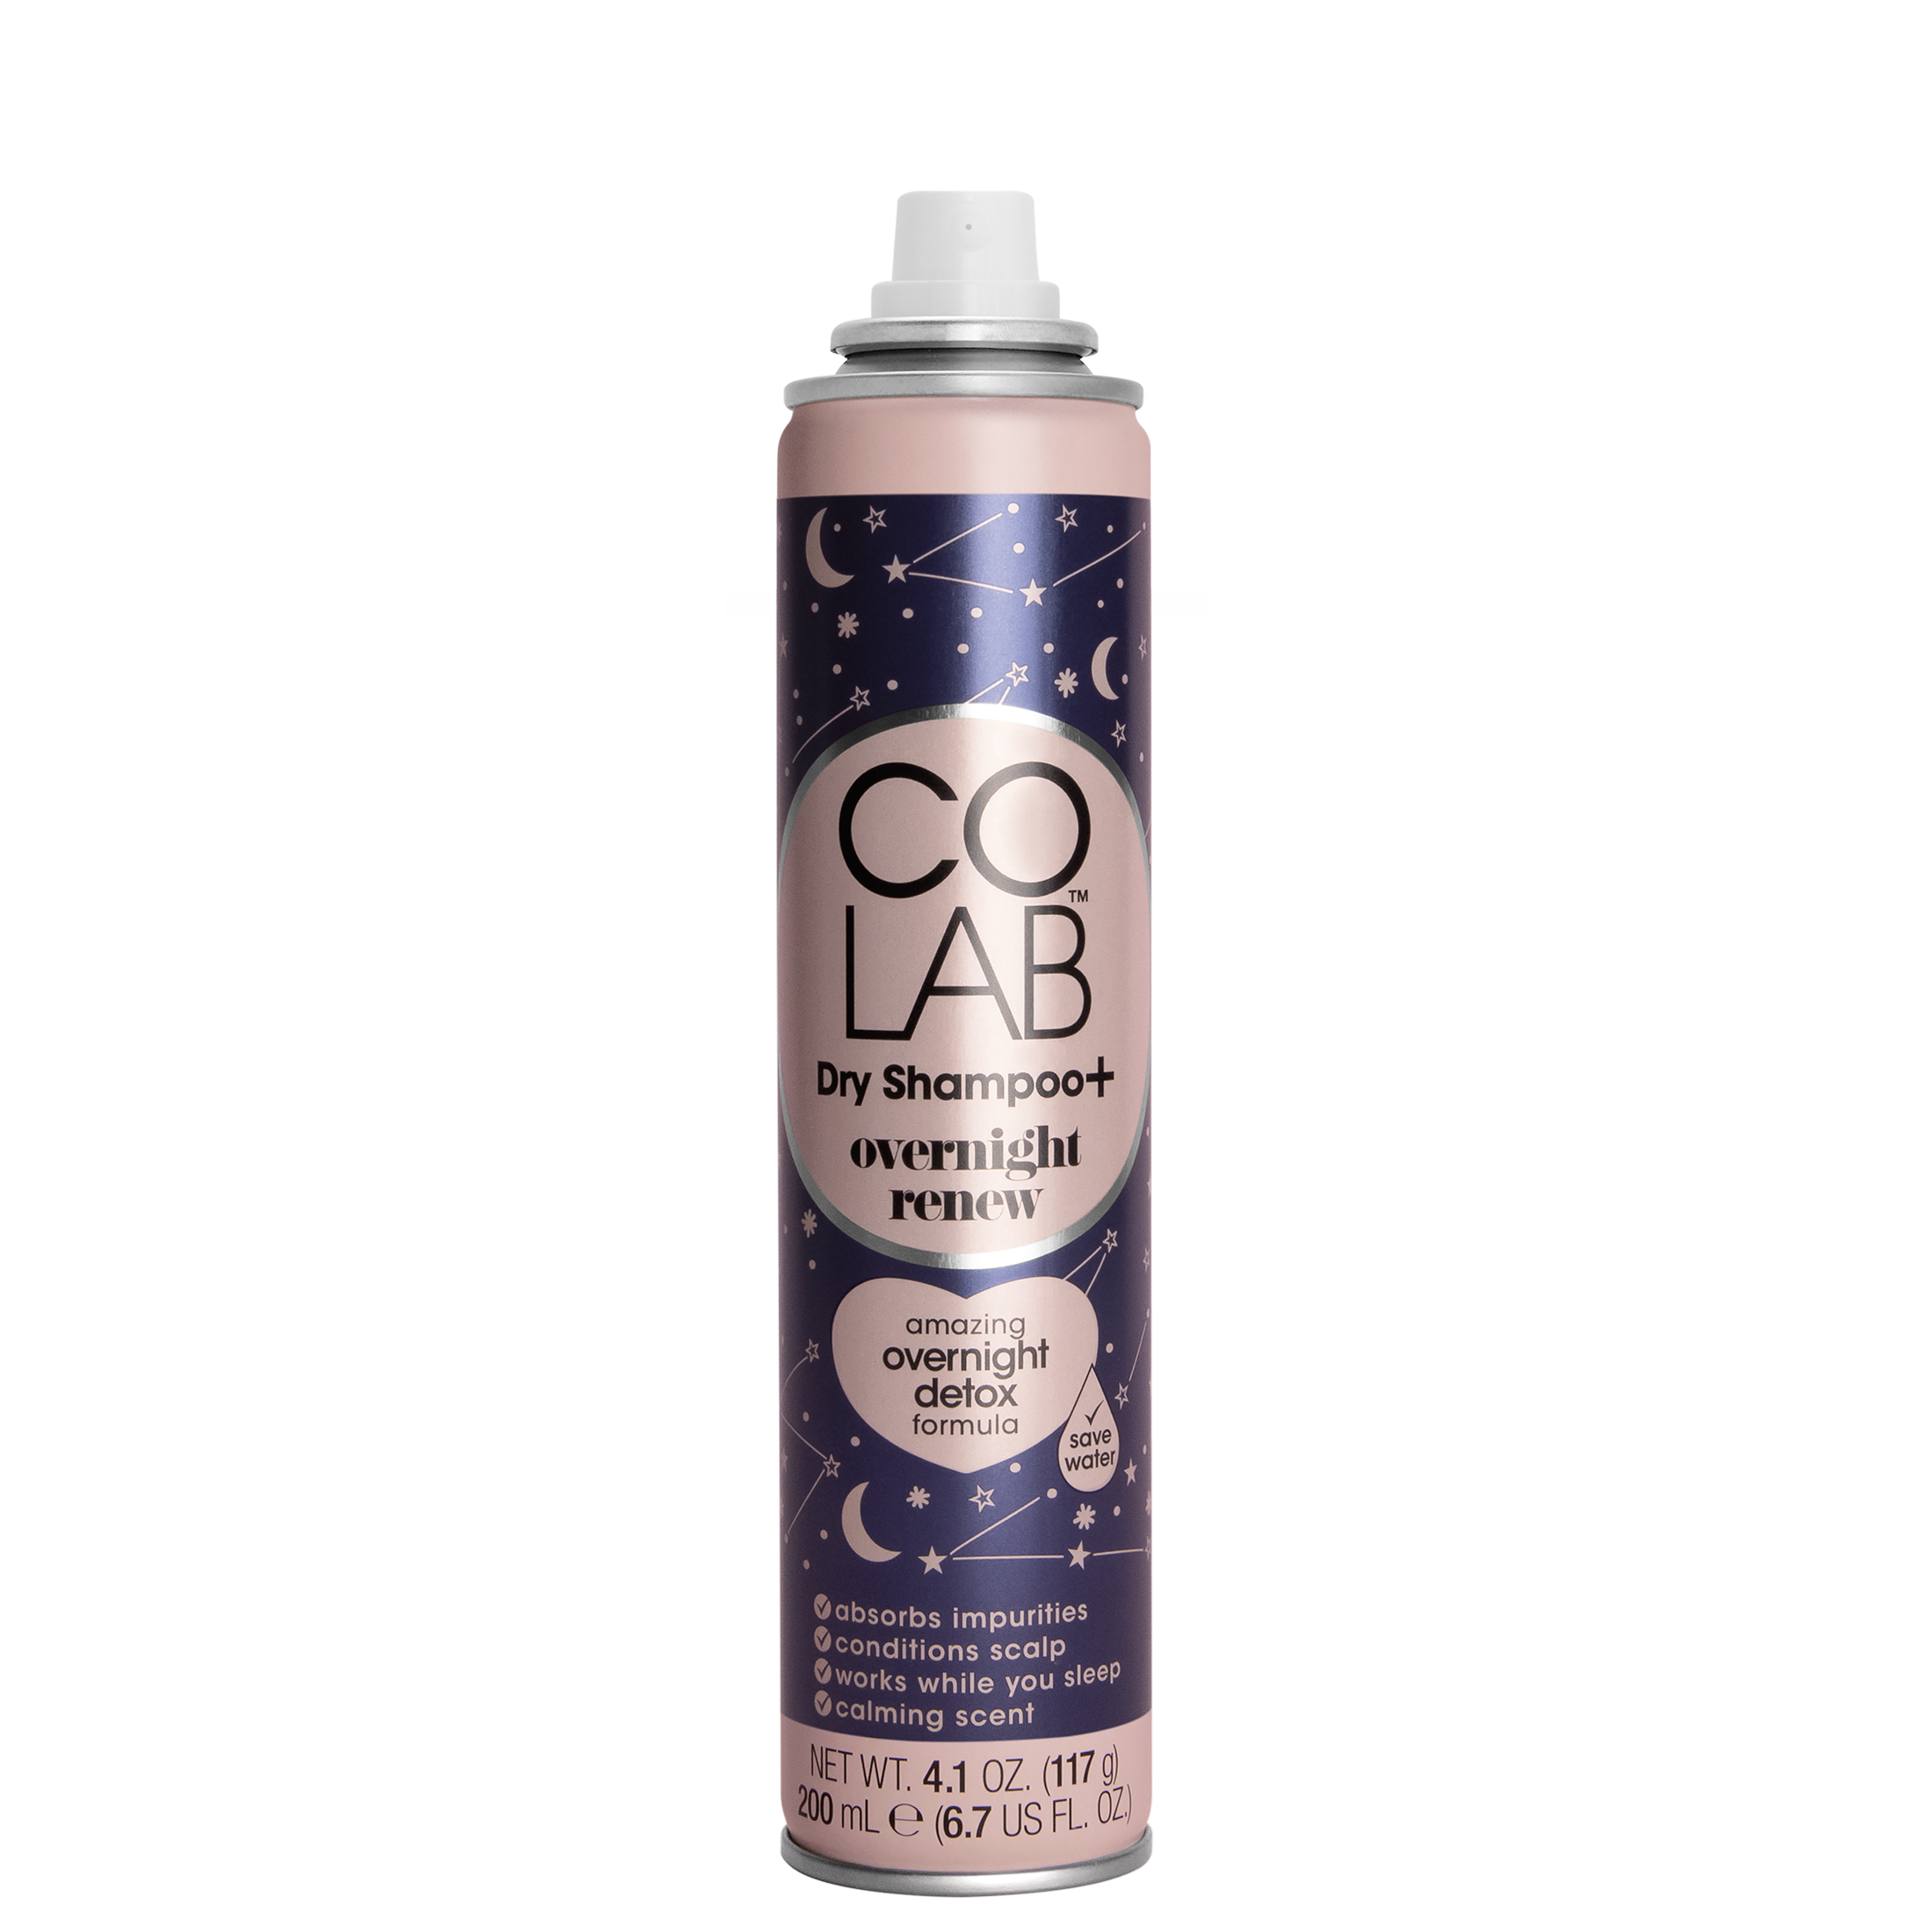 COLAB Dry + Shampoo Overnight Renew Oil Control with Lavender, 6.7 fl oz - image 3 of 6